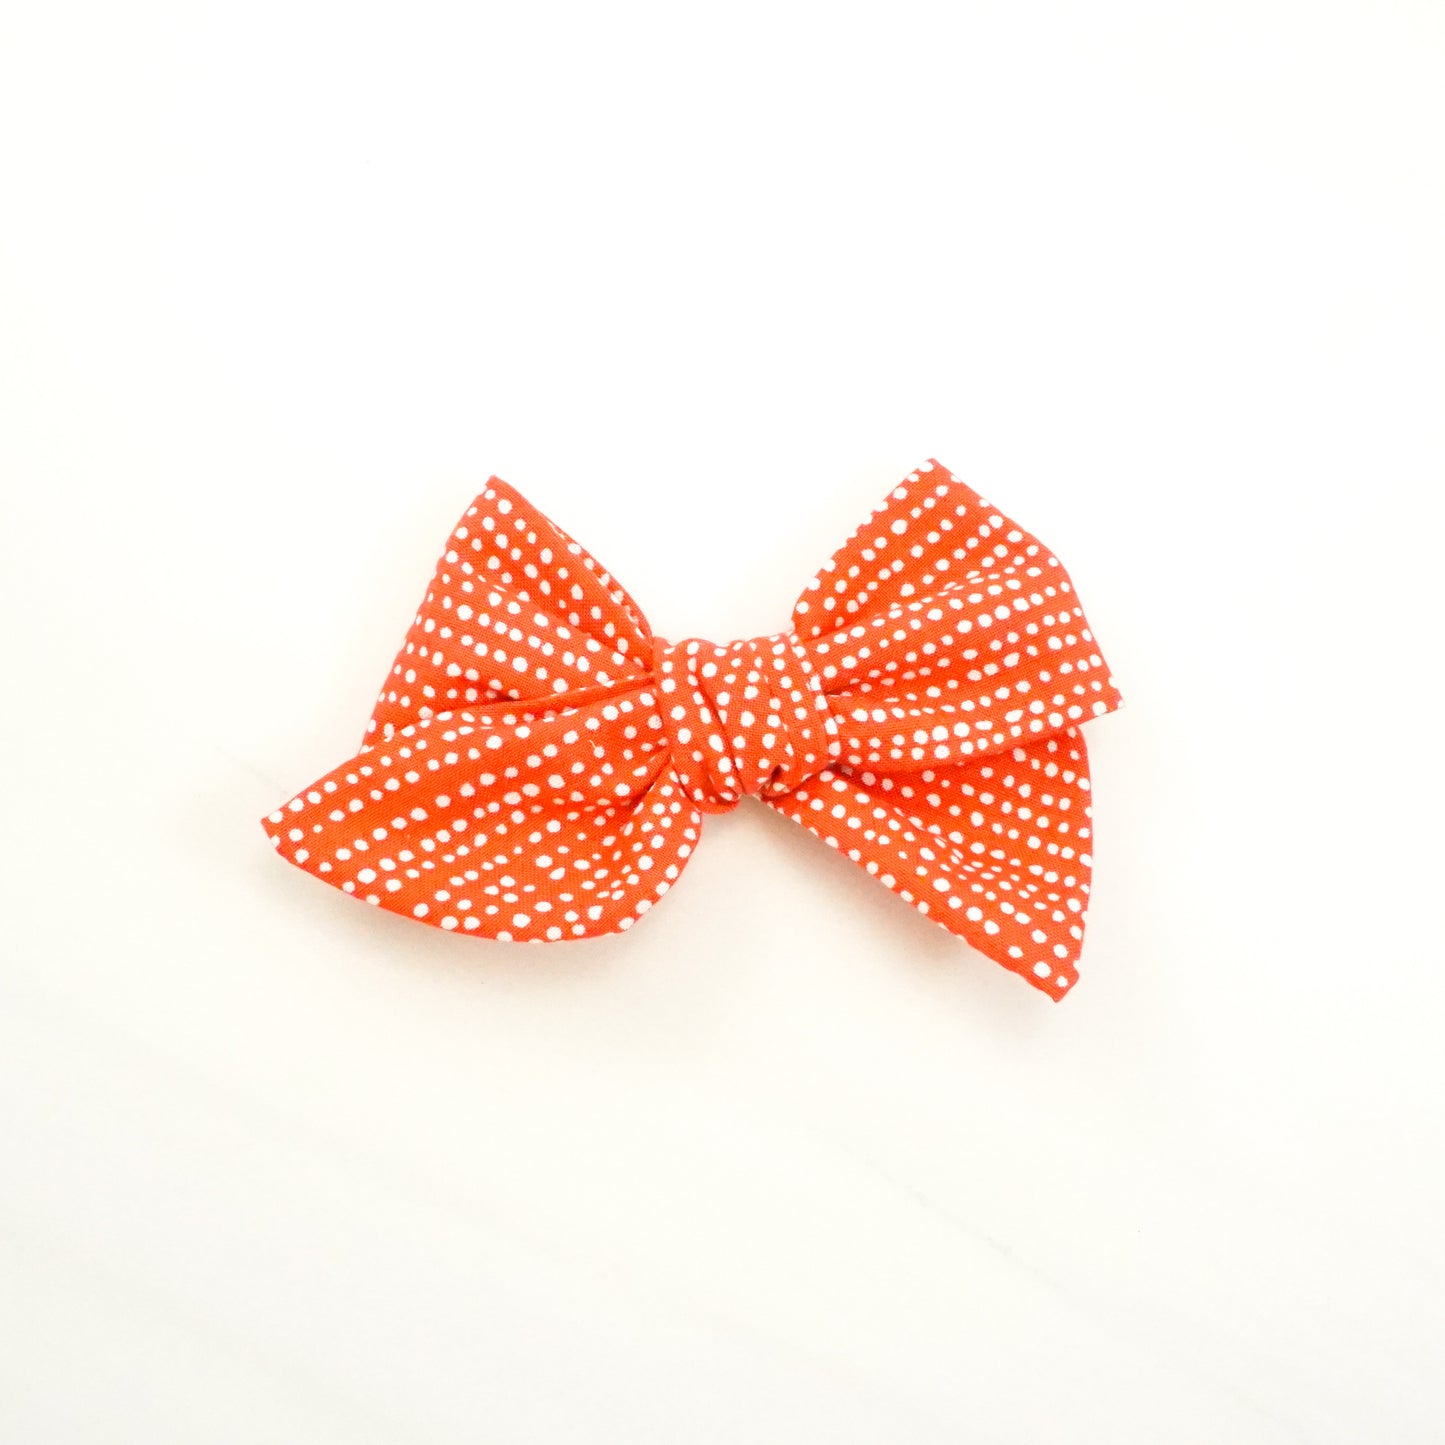 Handtied Fabric Bow - Ready to Ship (clip attached, see description) - Red Snowfall